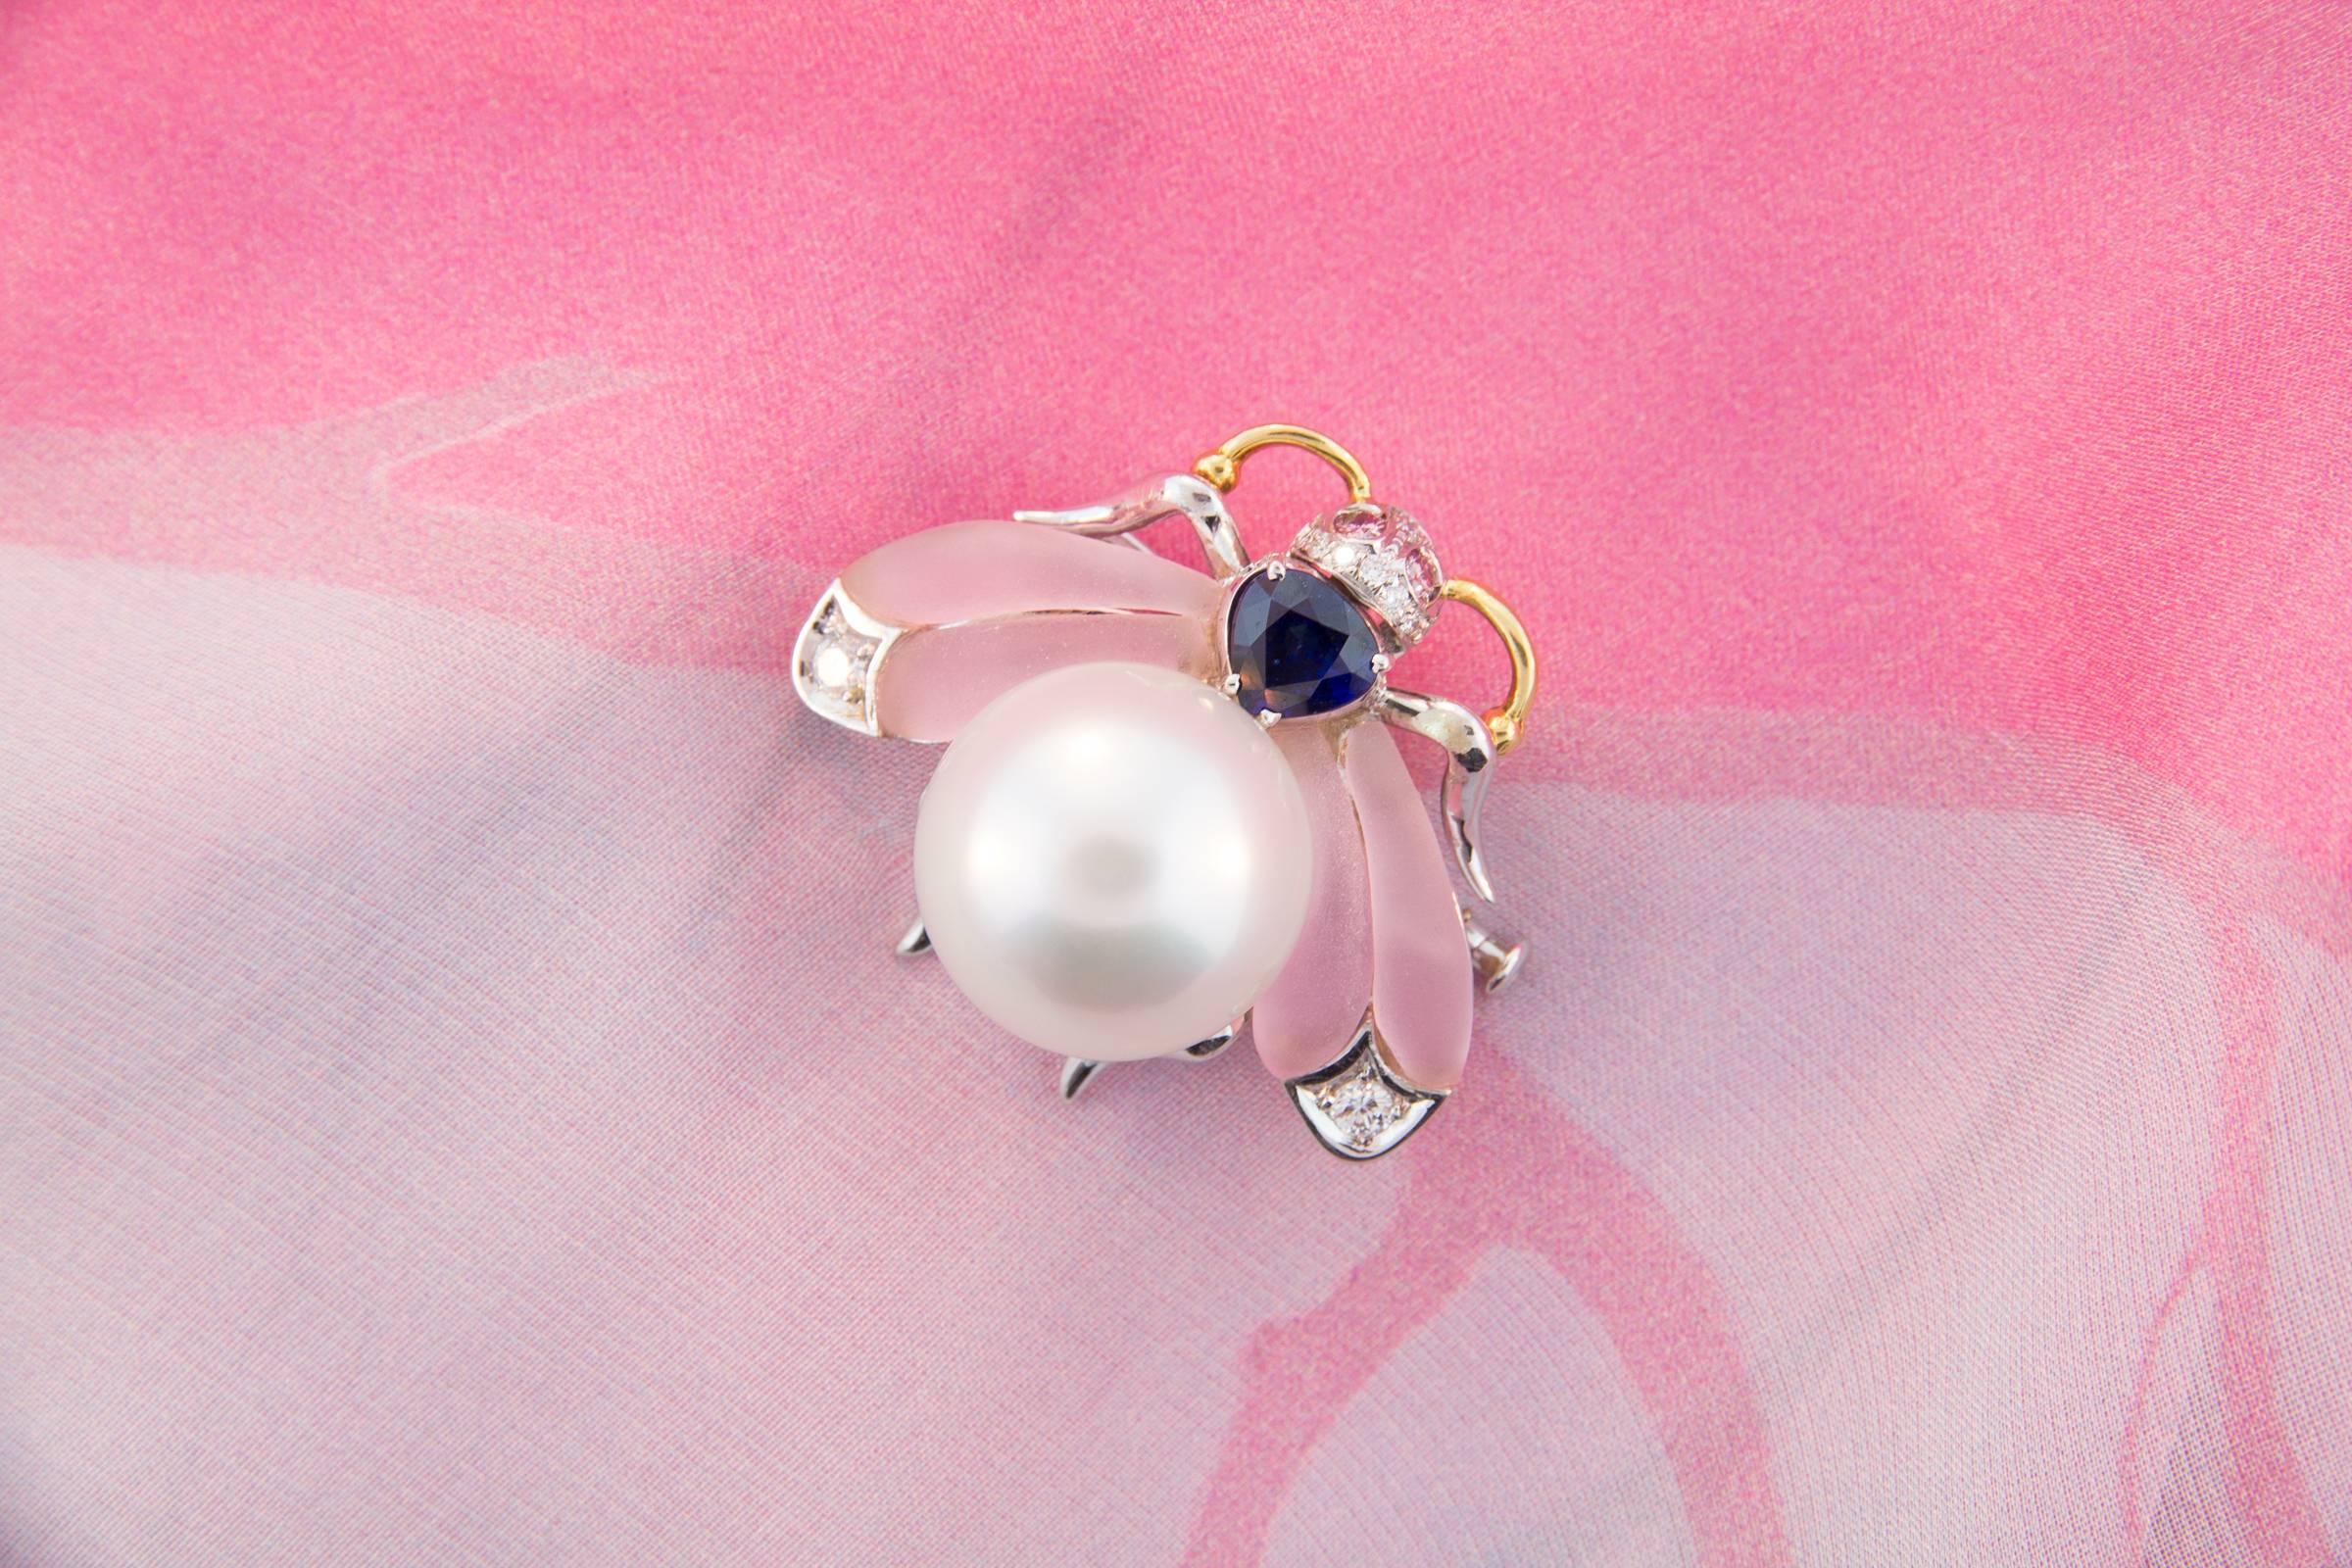 This bee brooch features a South Sea pearl of 18mm diameter. The wings are set with tinted custom cut frosted crystal. The design is complete with a faceted drop shape blue sapphire (1.57 carats) and 0.30 carats of round diamonds. The eyes are